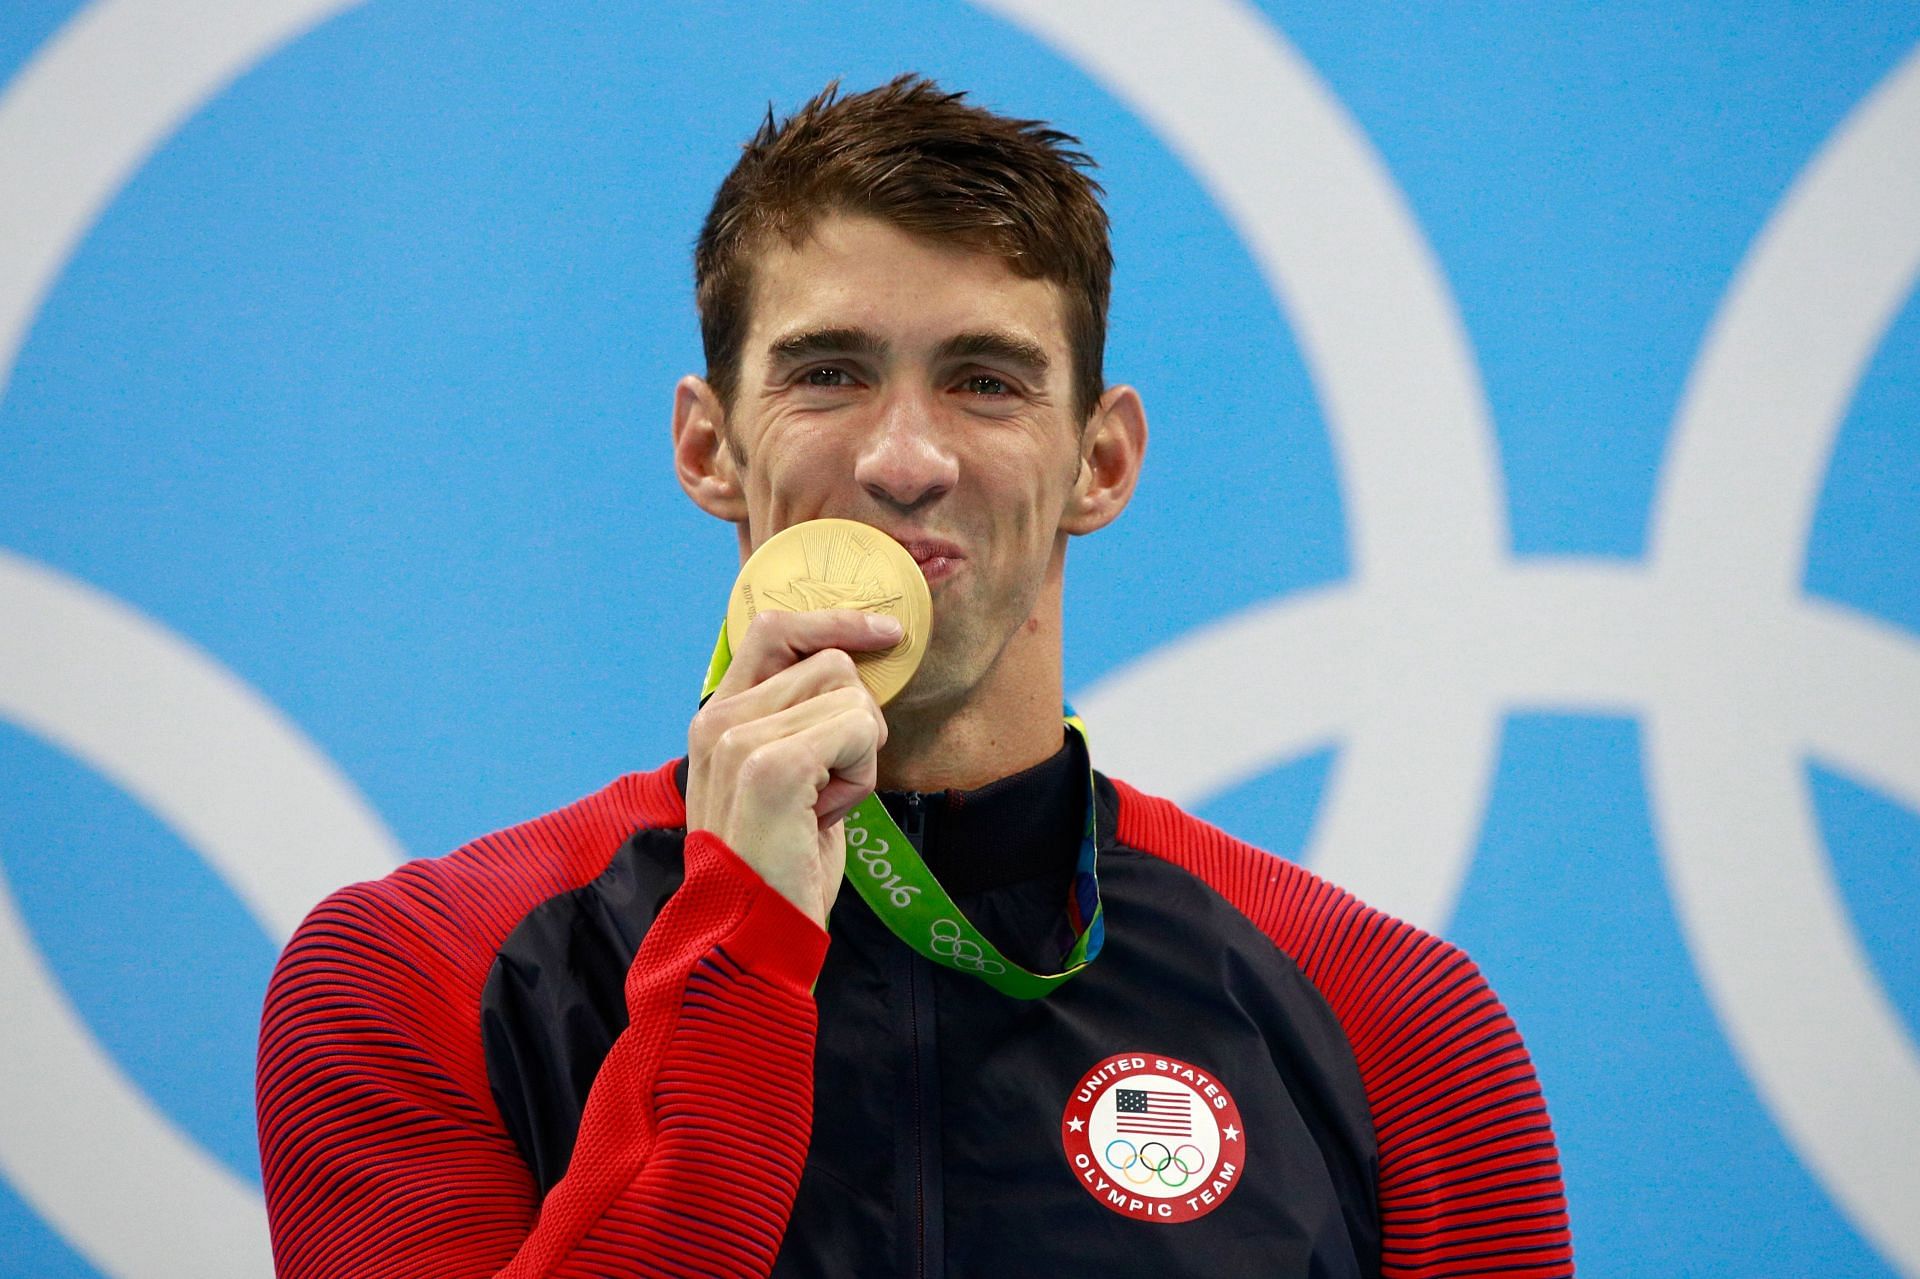 Michael Phelps celebrates during the medal ceremony for the Men&#039;s 200m Individual Medley Final at the Rio Olympic 2016. (Photo by Adam Pretty/Getty Images)